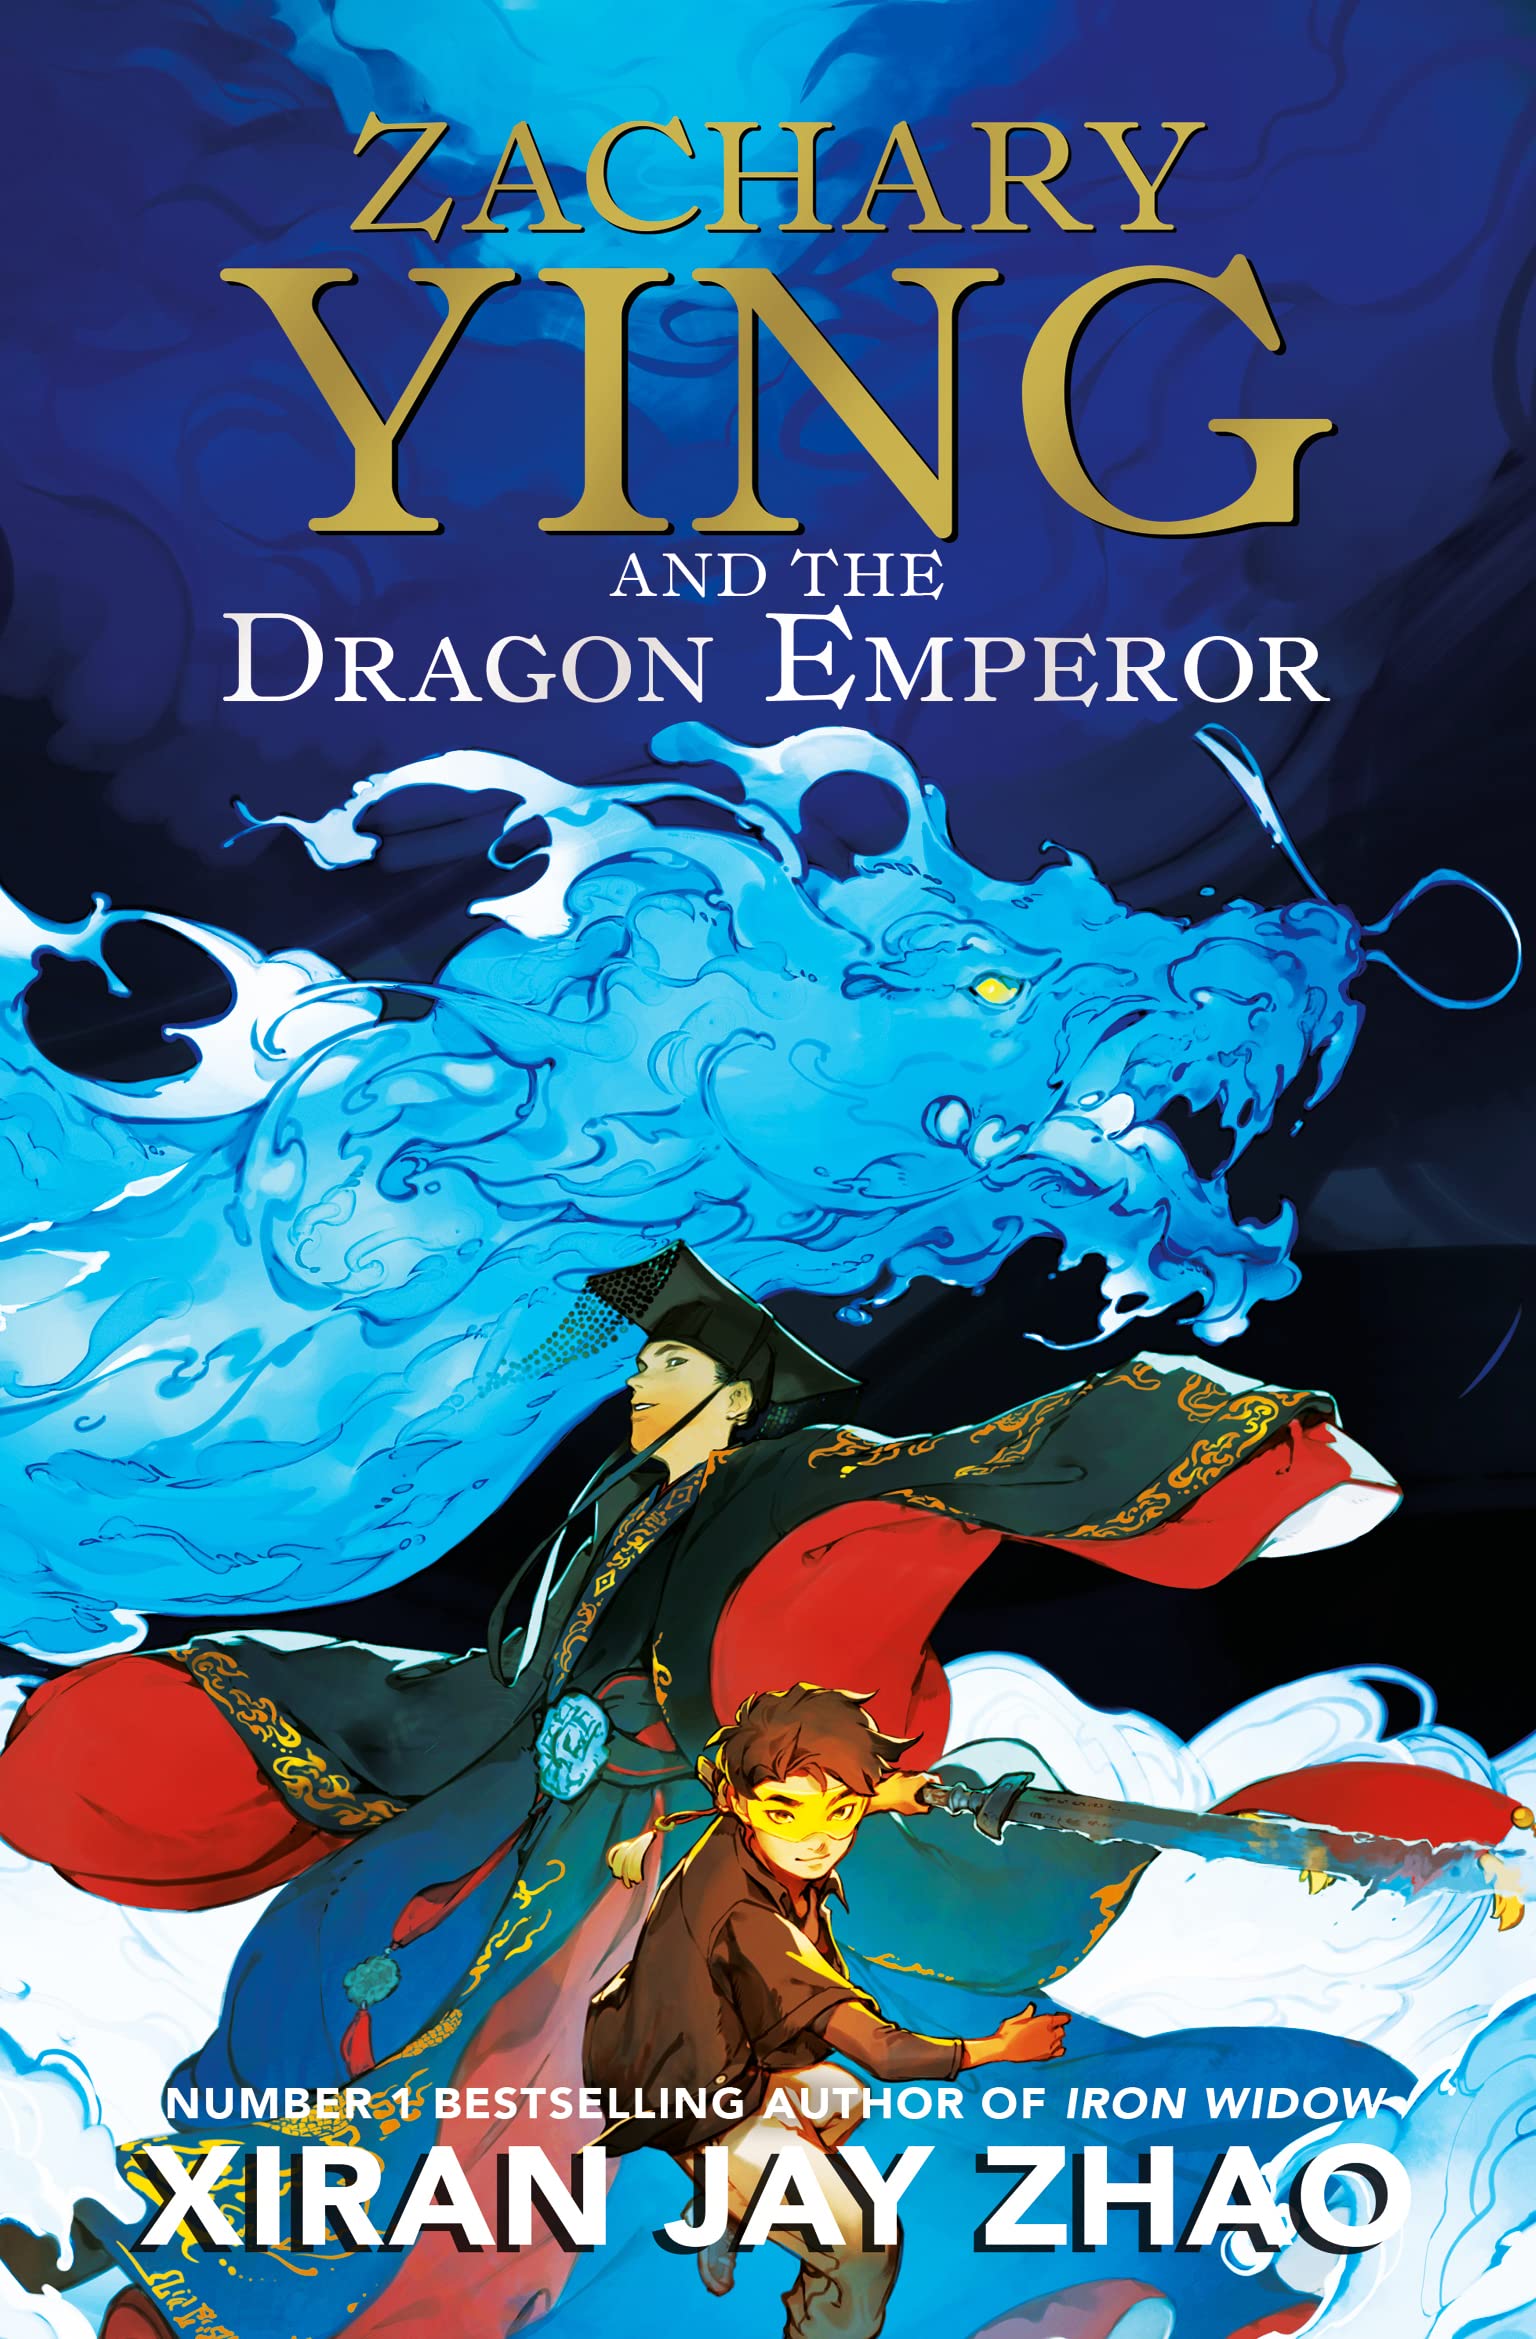 zachary ying and the dragon emperor review